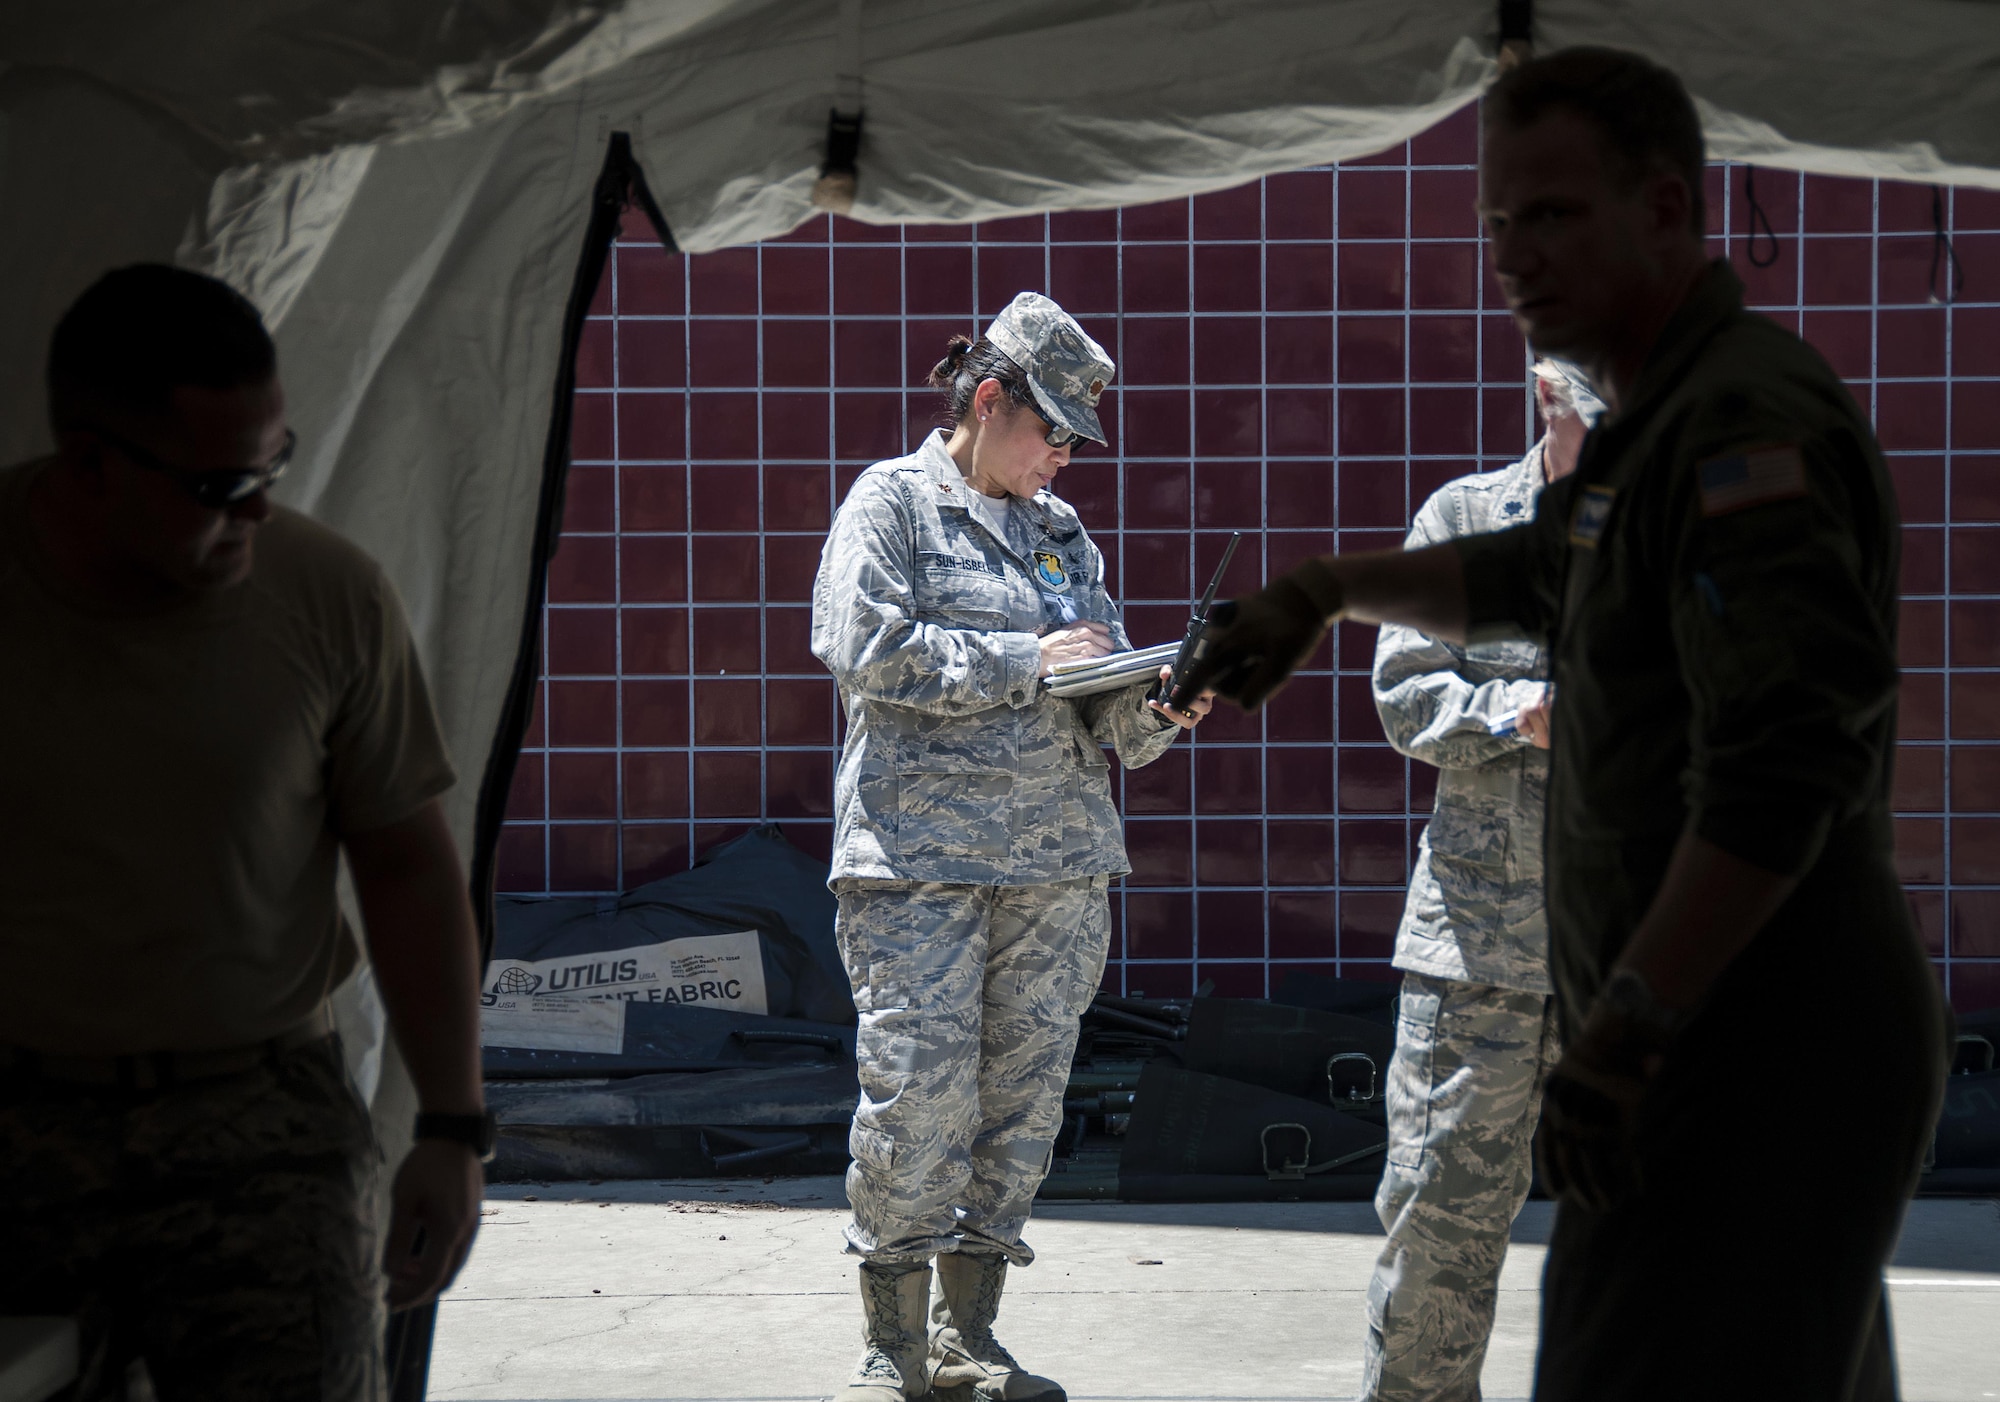 Maj. Theresa Sun-Isbell, 349th Aeromedical Staging Squadron wing inspection team lead, observes members of the ASTS partake in a humanitarian aid scenario as part of Patriot Wyvern at Travis Air Force Base, Cali., on July 22, 2017. The 349th ASTS members had one hour to set up an En-Route Patient Staging Facility and communications. They accomplished their task in less than 30 minutes. (U.S. Air Force photo by Staff Sgt. Daniel Phelps)